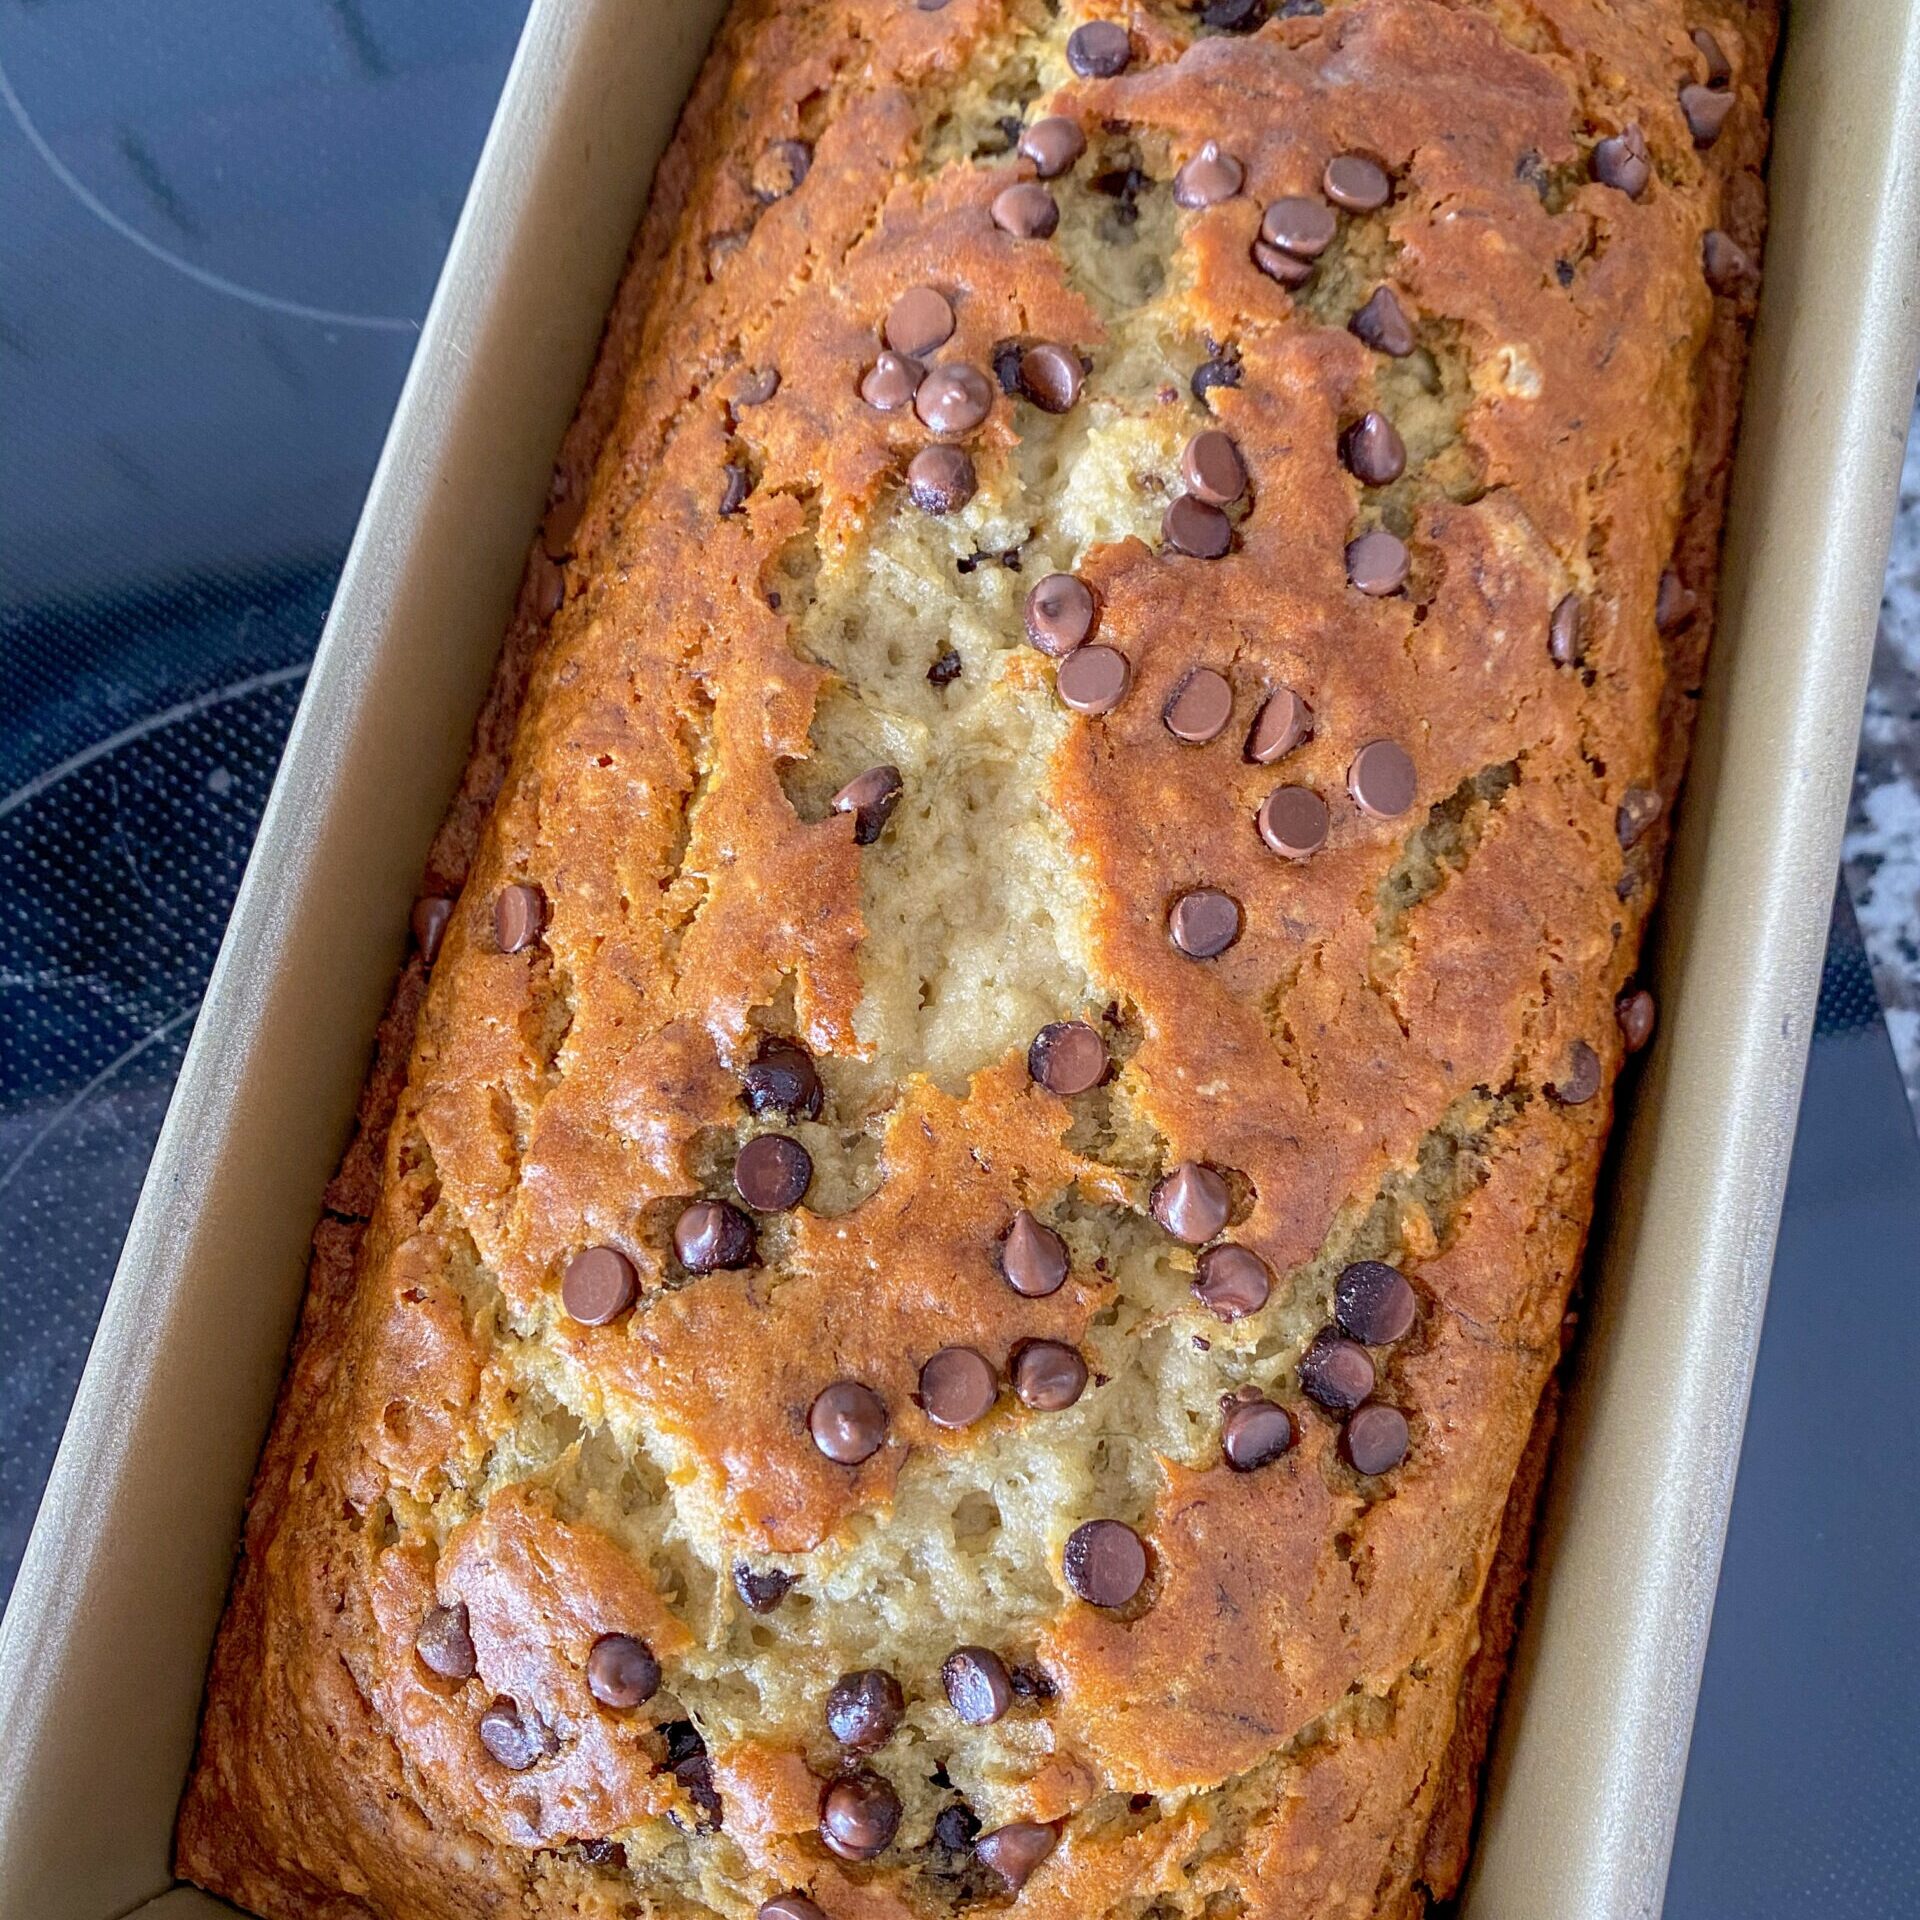 Chocolate chip banana bread in a loaf pan.